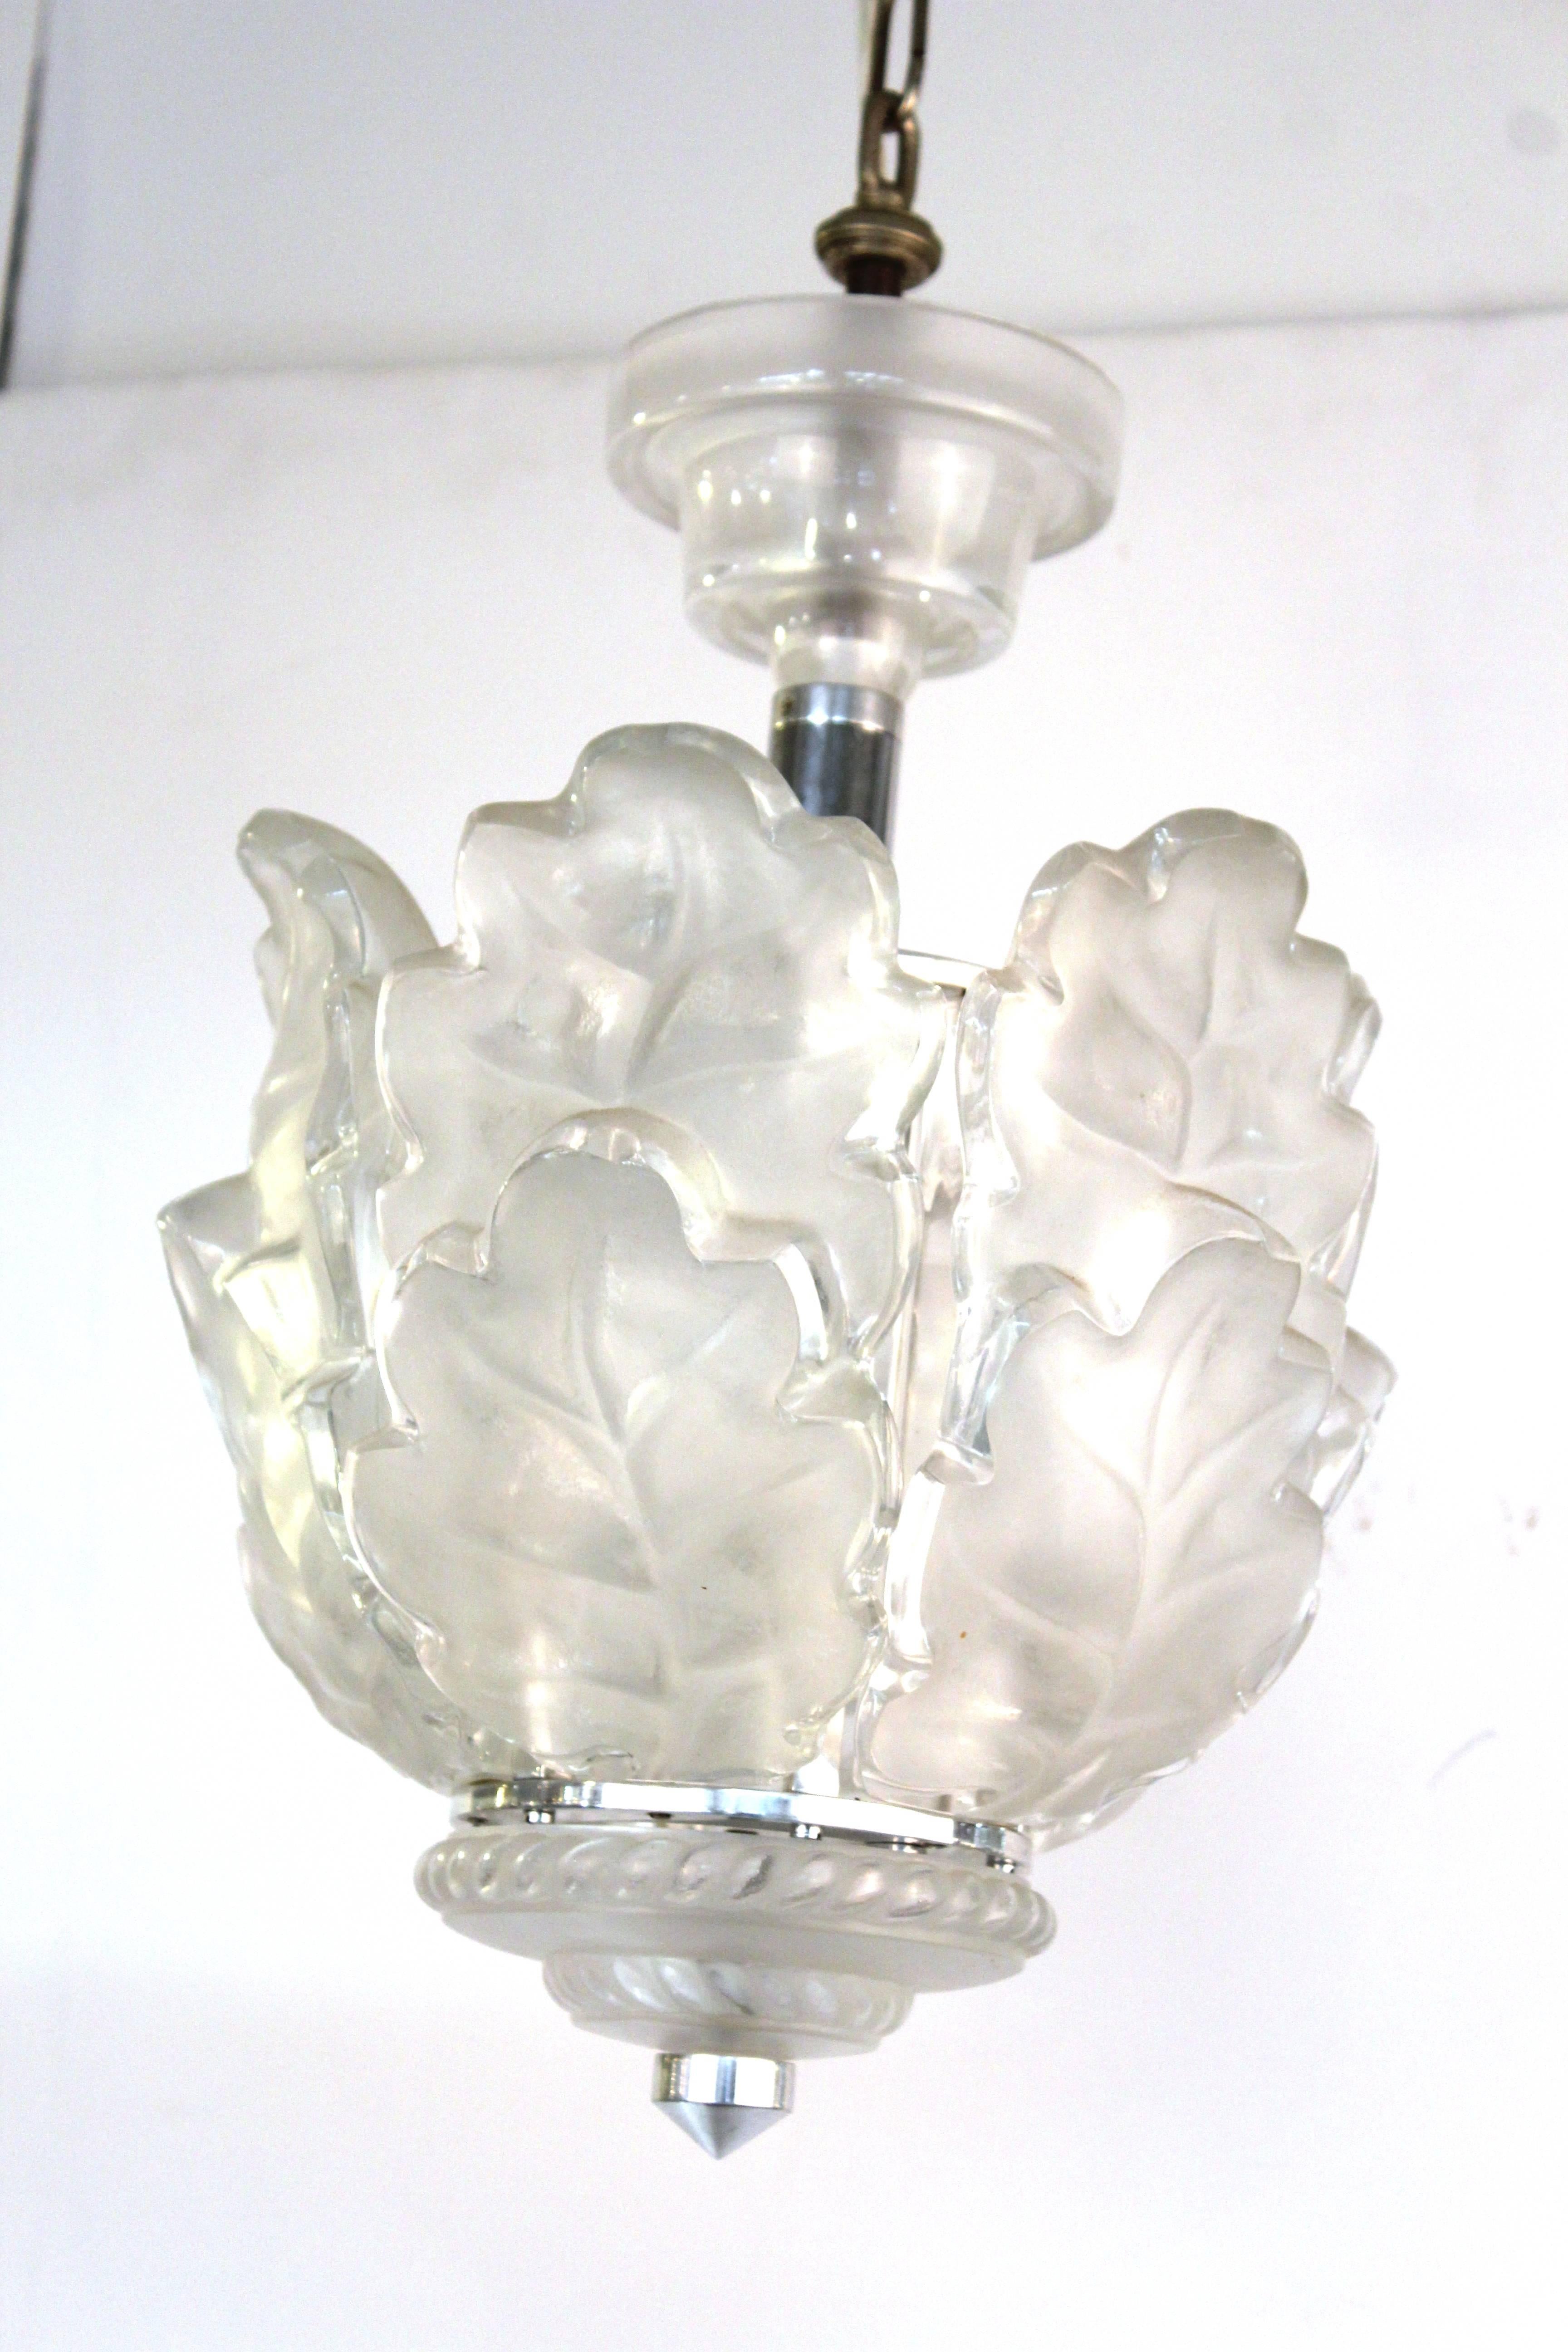 A ceiling pendant by Lalique from the "Chene" or oak collection characterized by its overlapping frosted glass leaves.